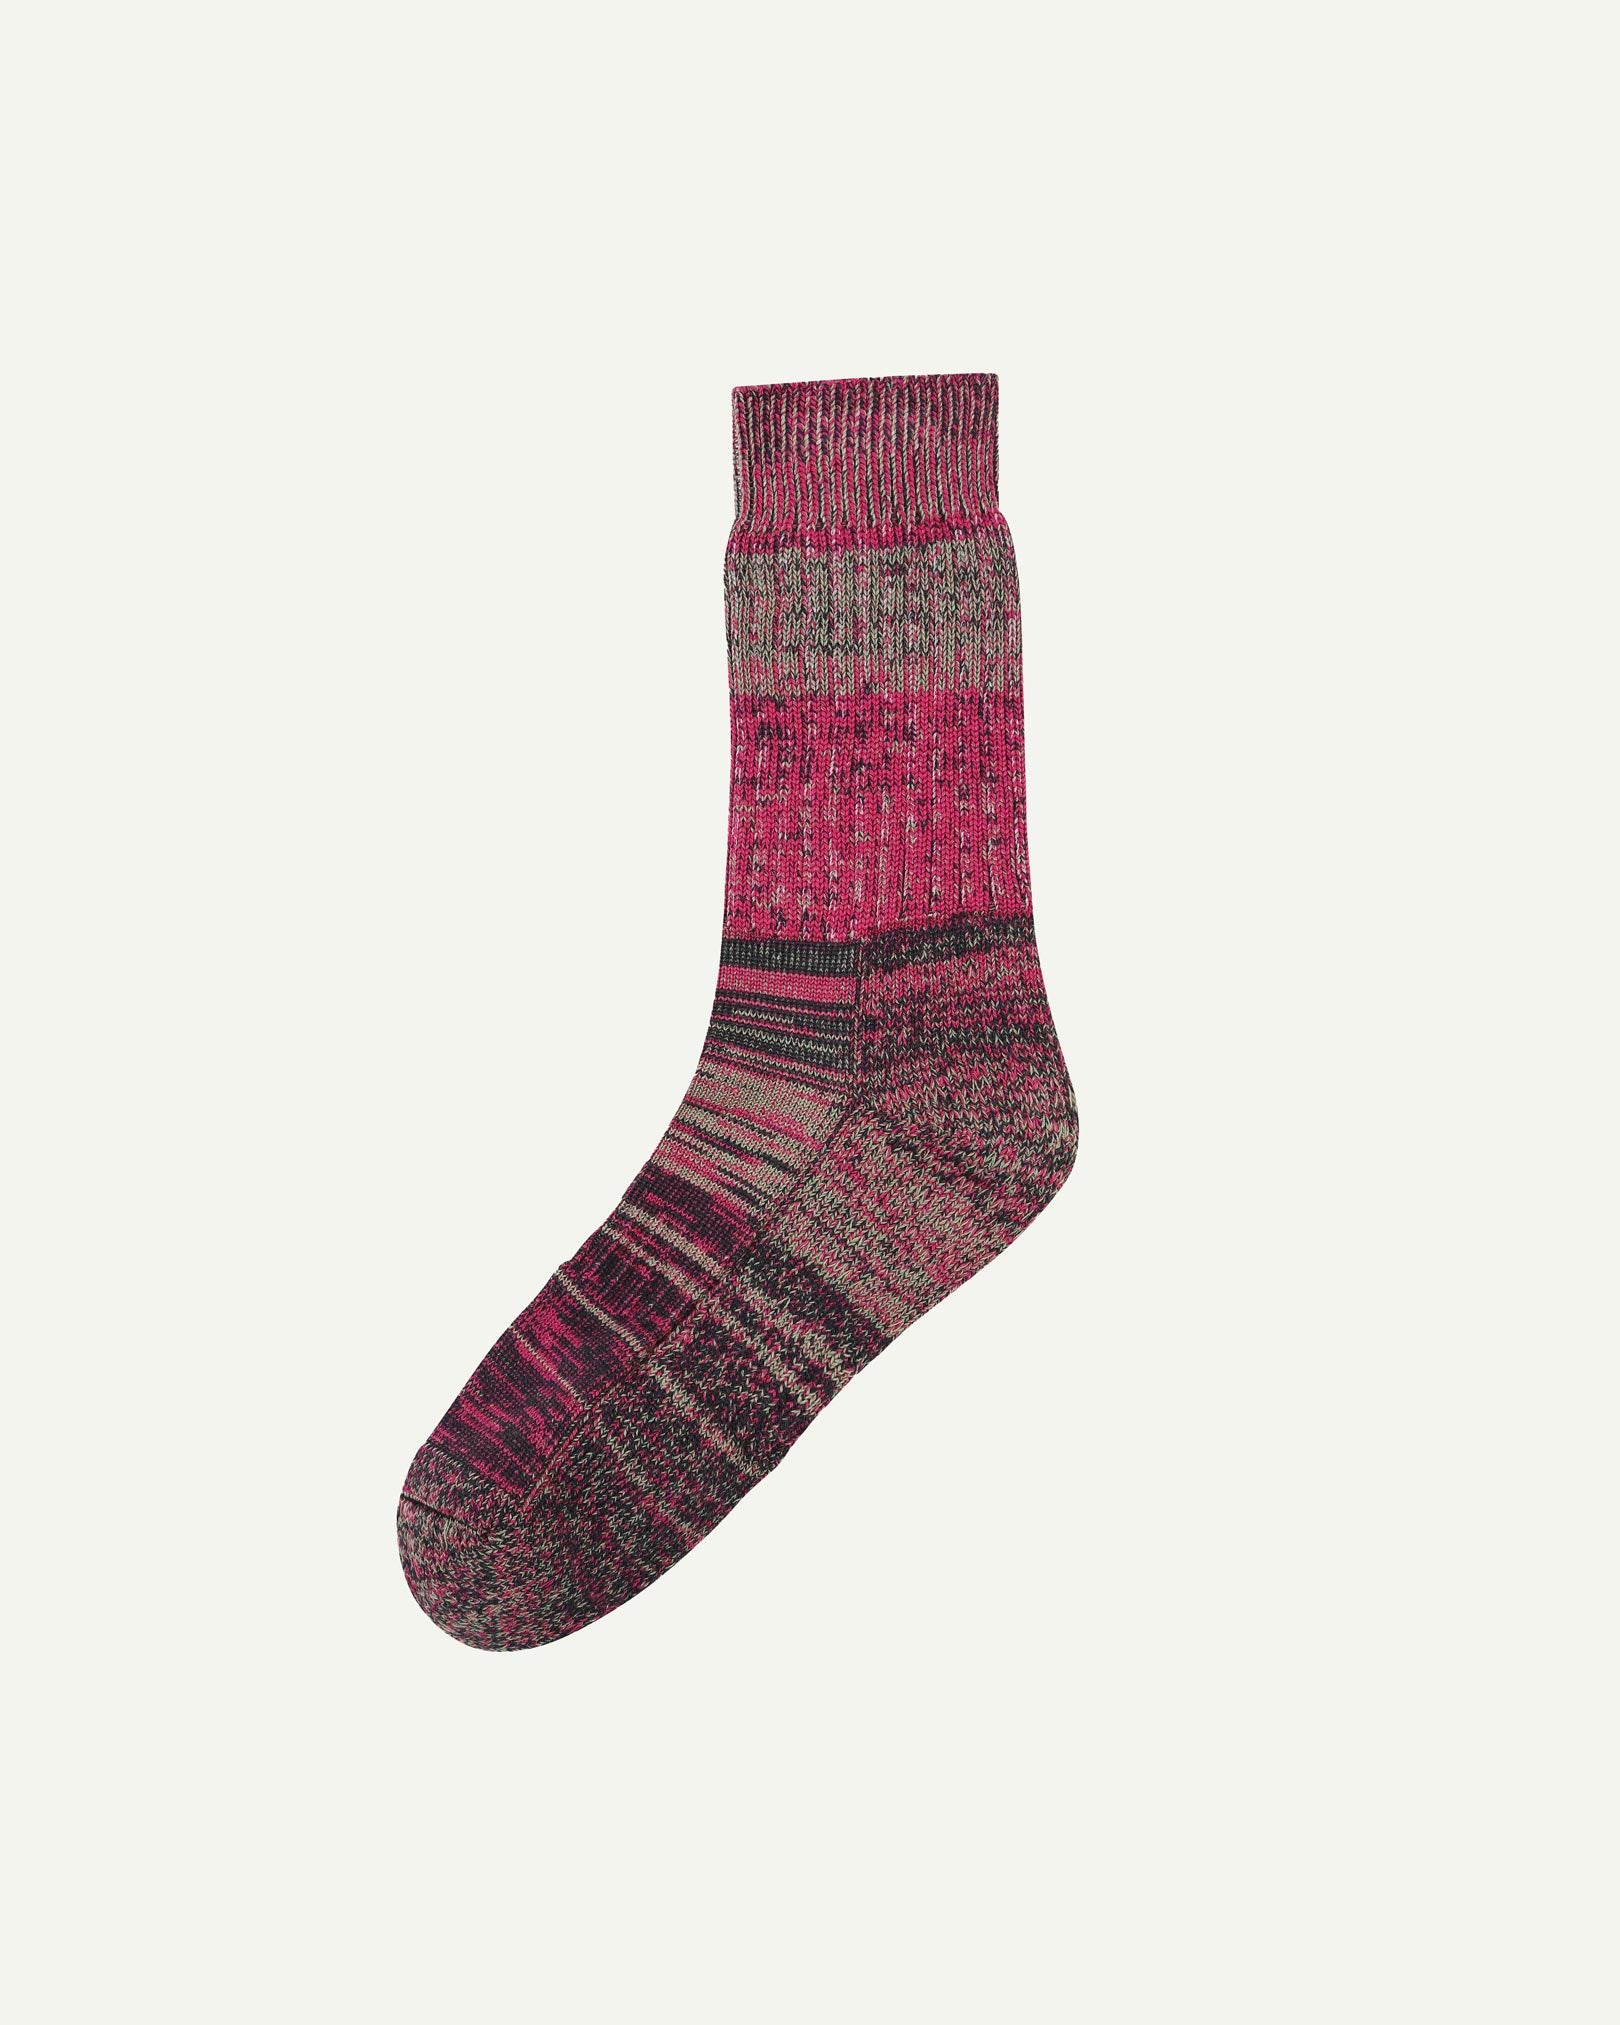 Flat view of Uskees 4006 violet mix organic cotton sock, showing bands of red, brown and beige.